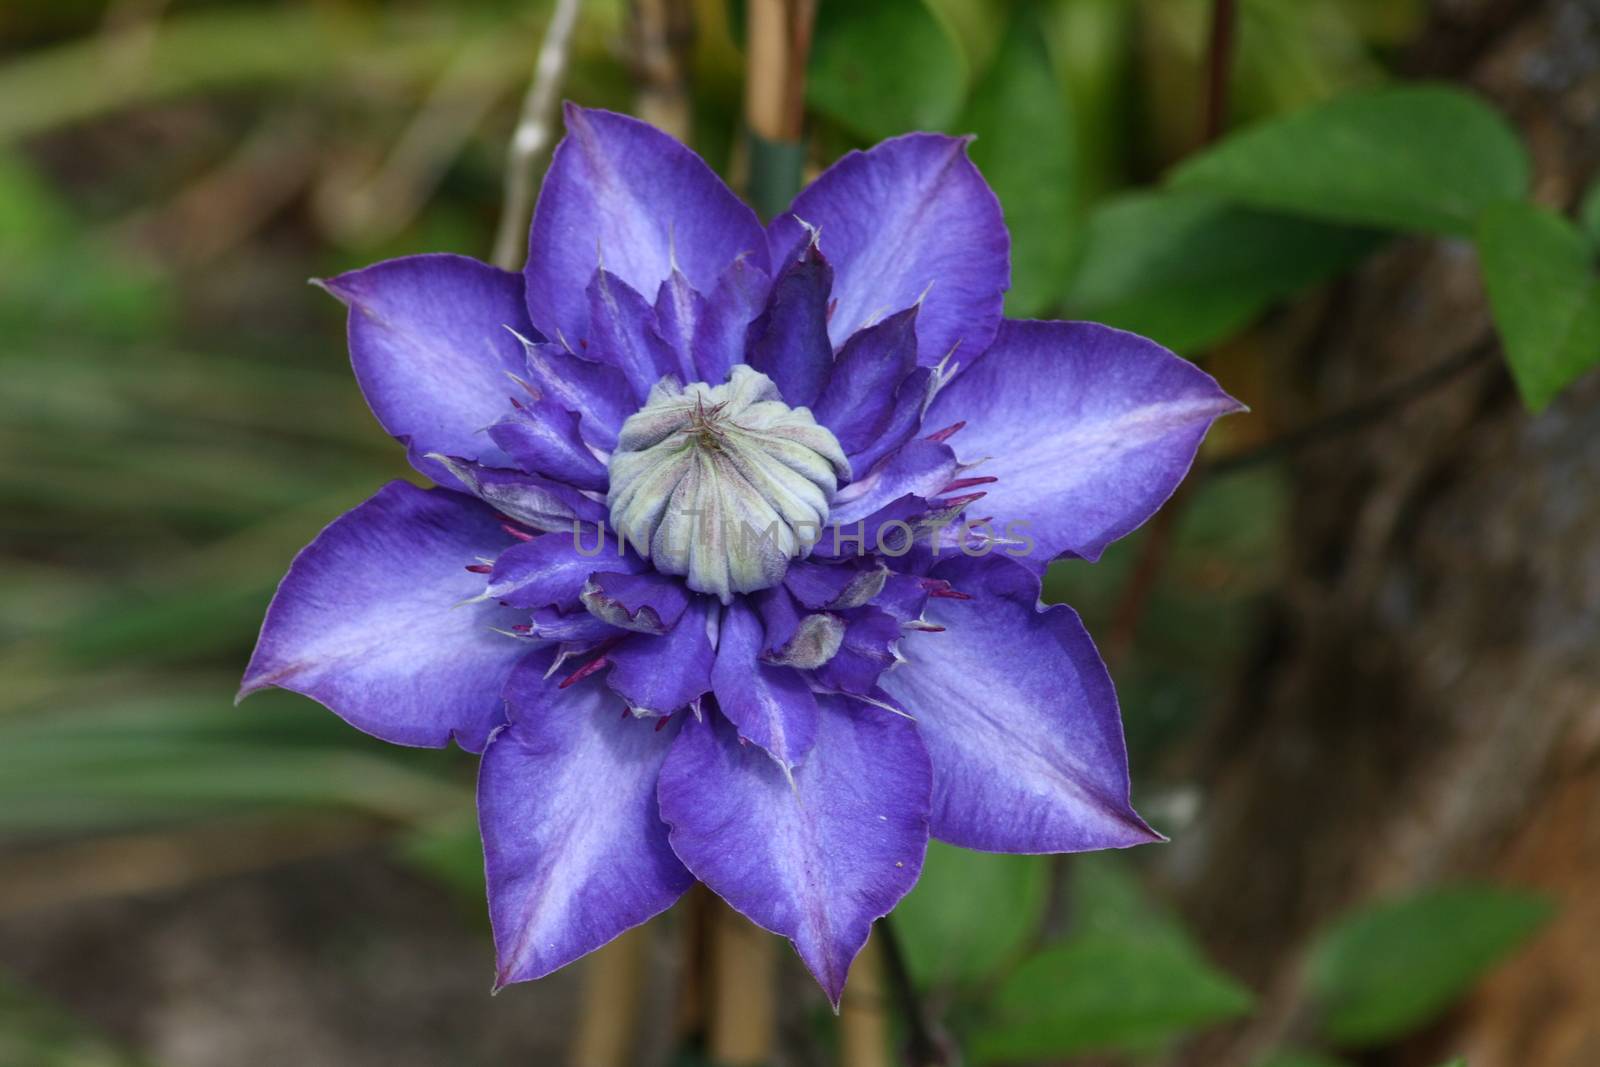 Closeup of a blue flowering clematis (Clematis)